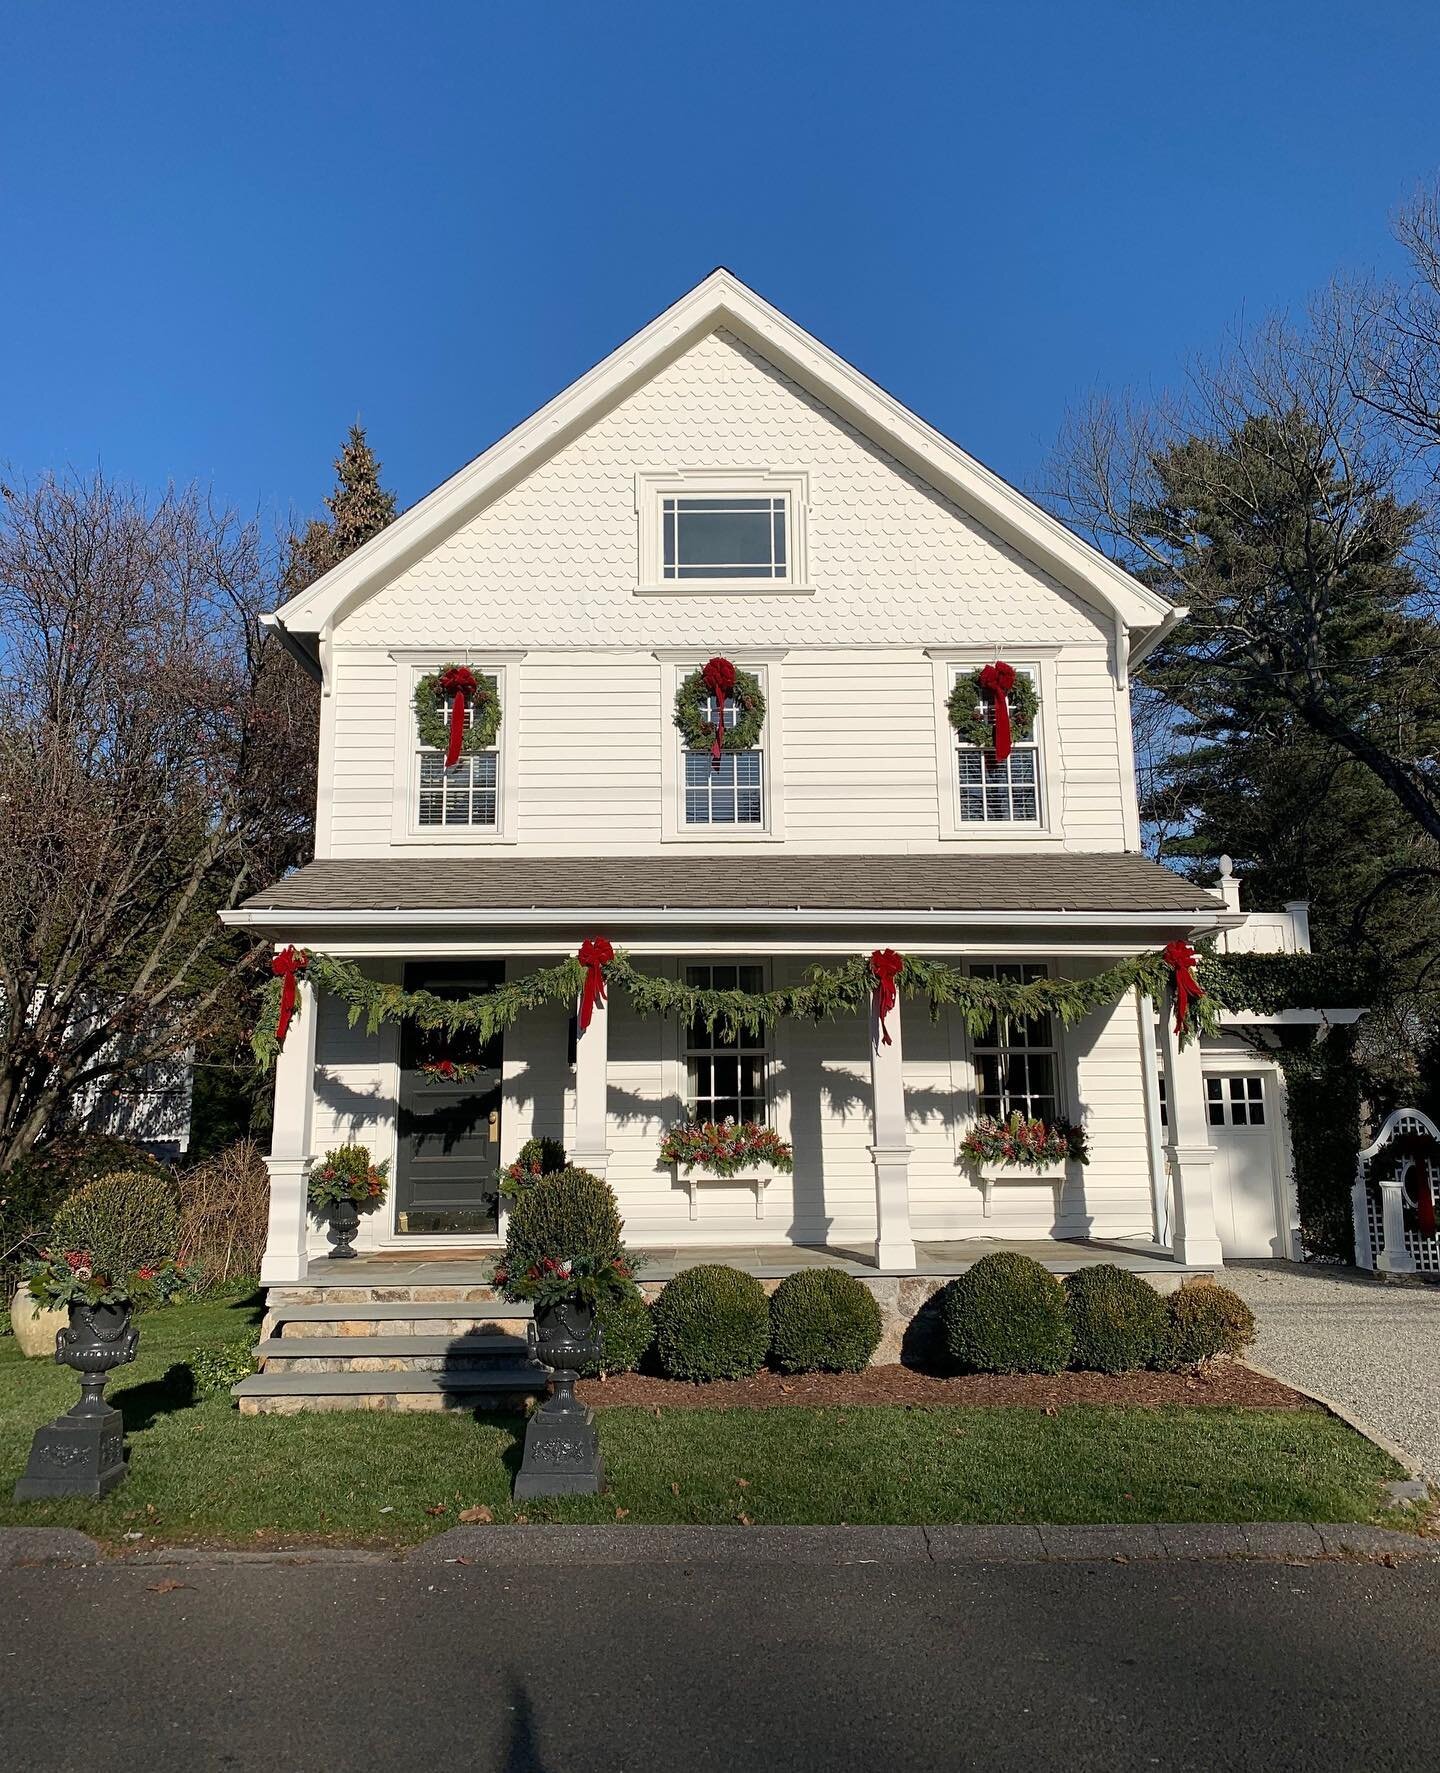 Southport shows off all year! 🎄✨️🎁⁠
⁠
-&mdash;&mdash;&mdash;&mdash;&mdash;&mdash;⁠
⁠
#teamKMS #compassct #westportct #thisiscompass #fairfieldct #compasseverywhere #lovewhereyoulive #connecticutlife